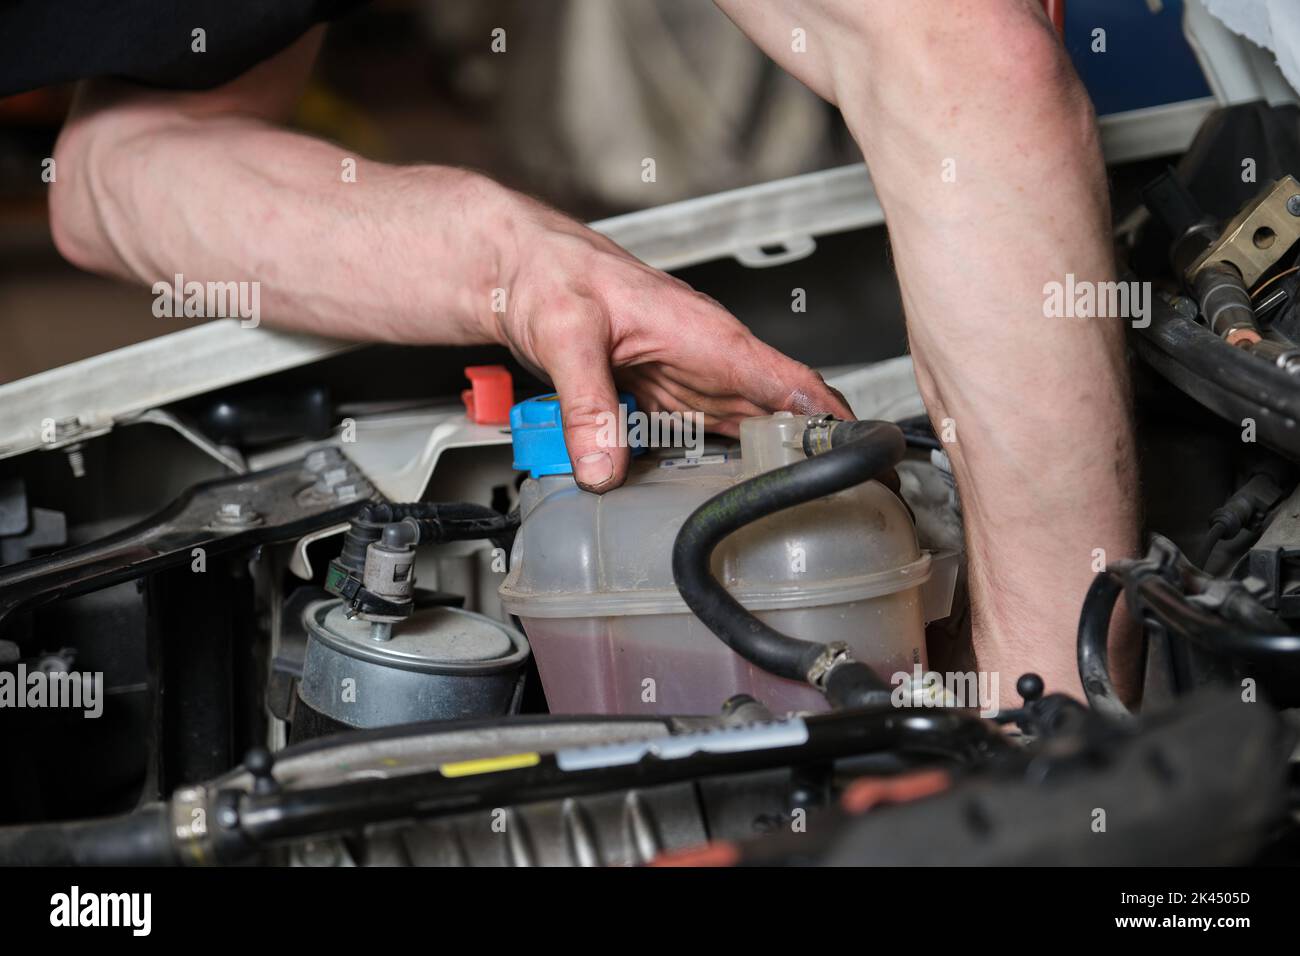 Car mechanic checking pulley on a car engine. Stock Photo